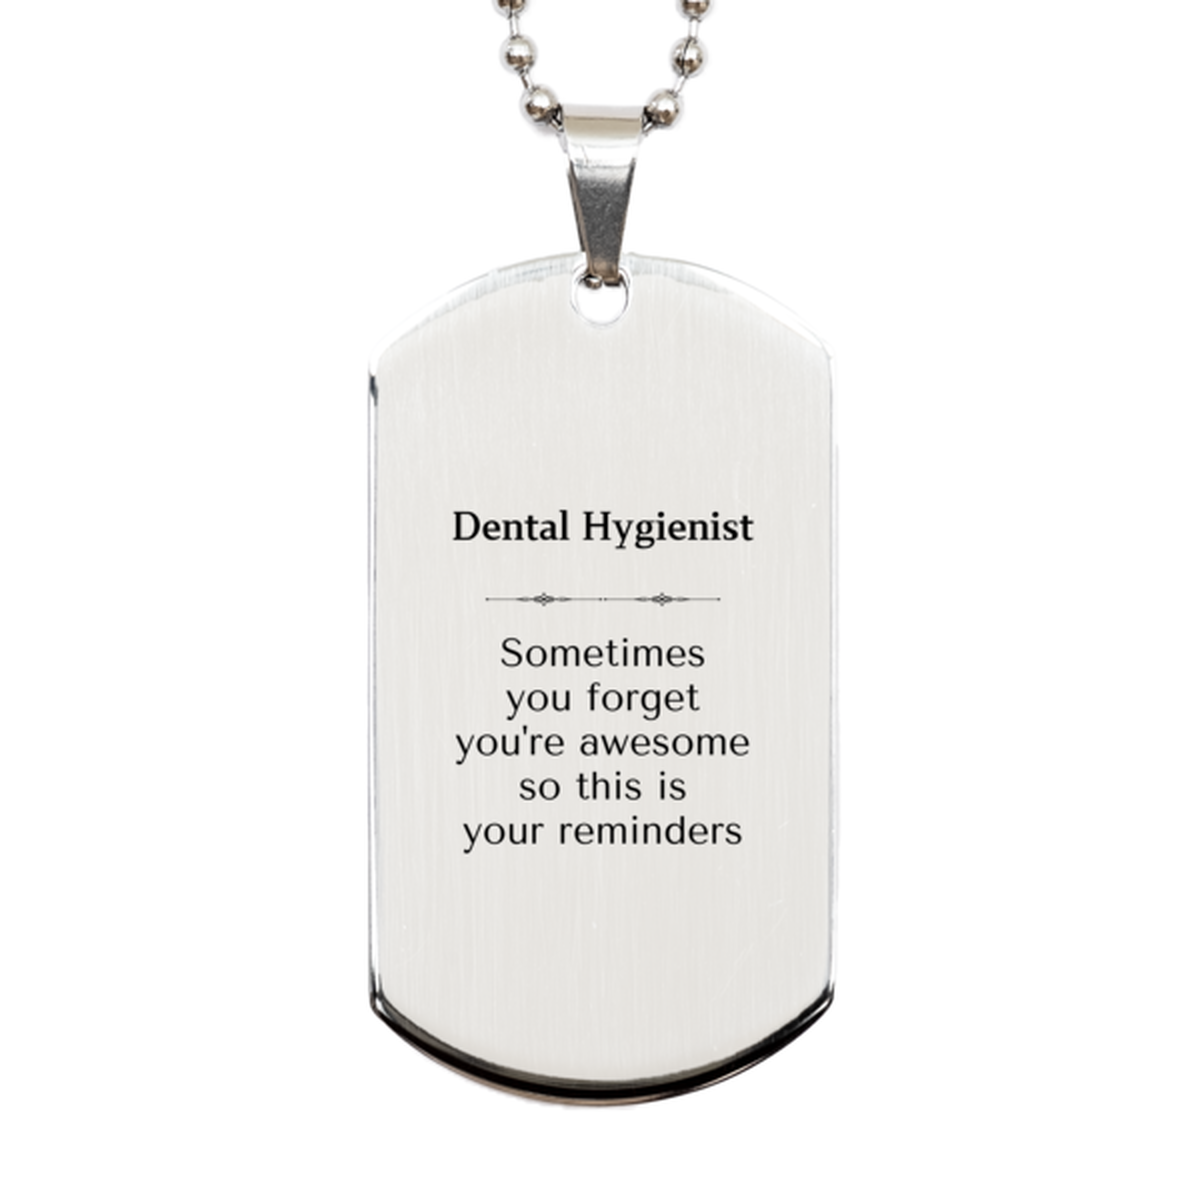 Sentimental Dental Hygienist Silver Dog Tag, Dental Hygienist Sometimes you forget you're awesome so this is your reminders, Graduation Christmas Birthday Gifts for Dental Hygienist, Men, Women, Coworkers